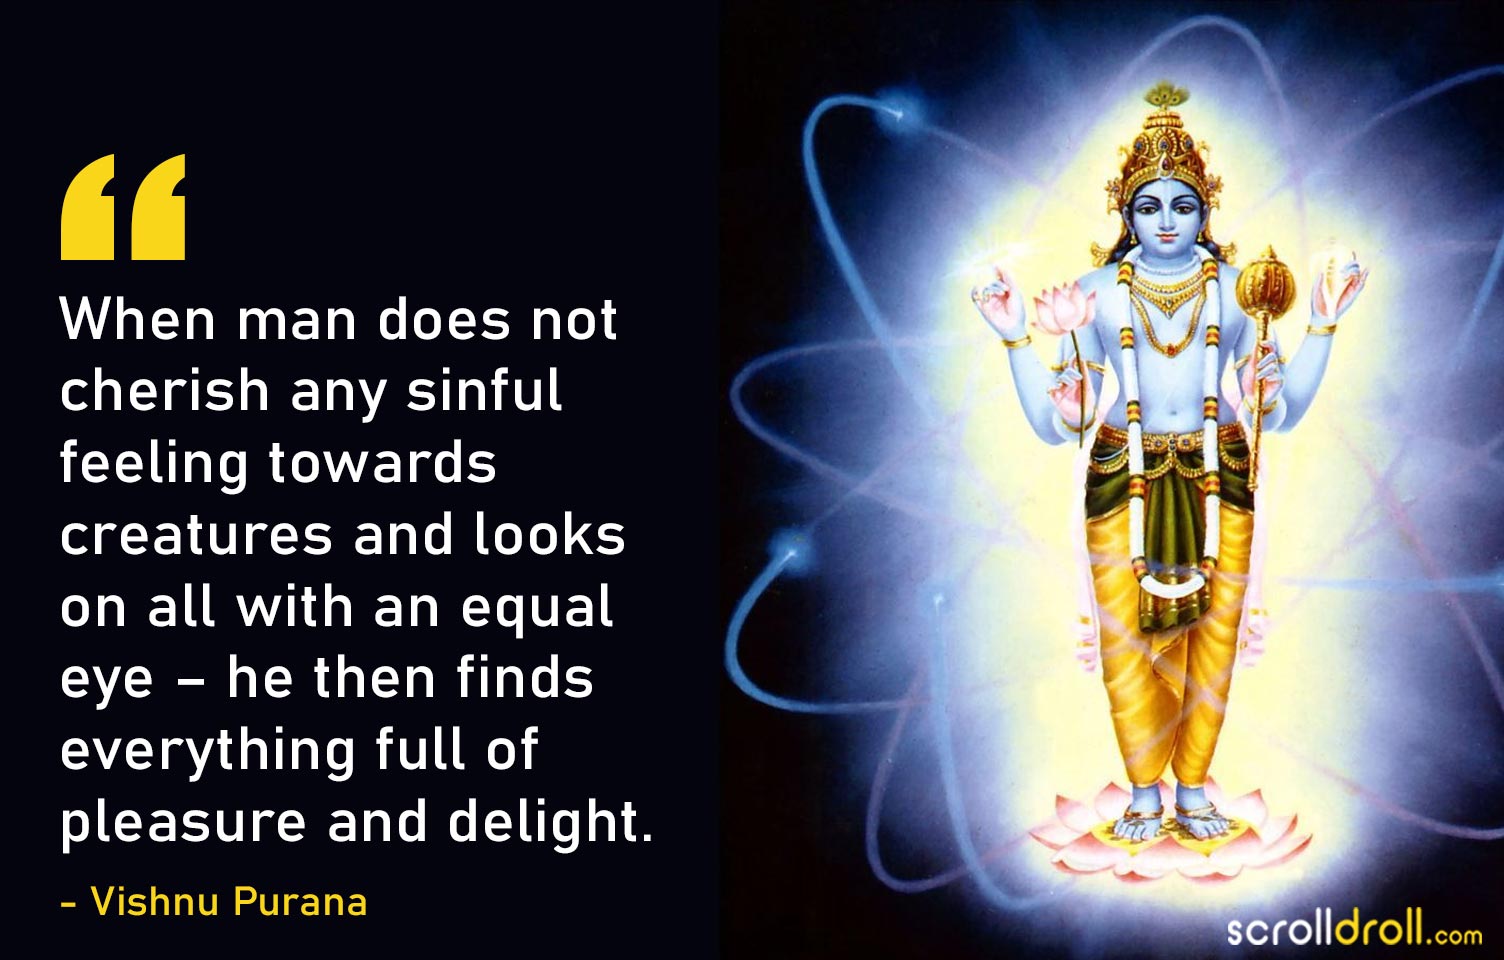 12 Quotes From Vishnu Purana For A Meaningful Life